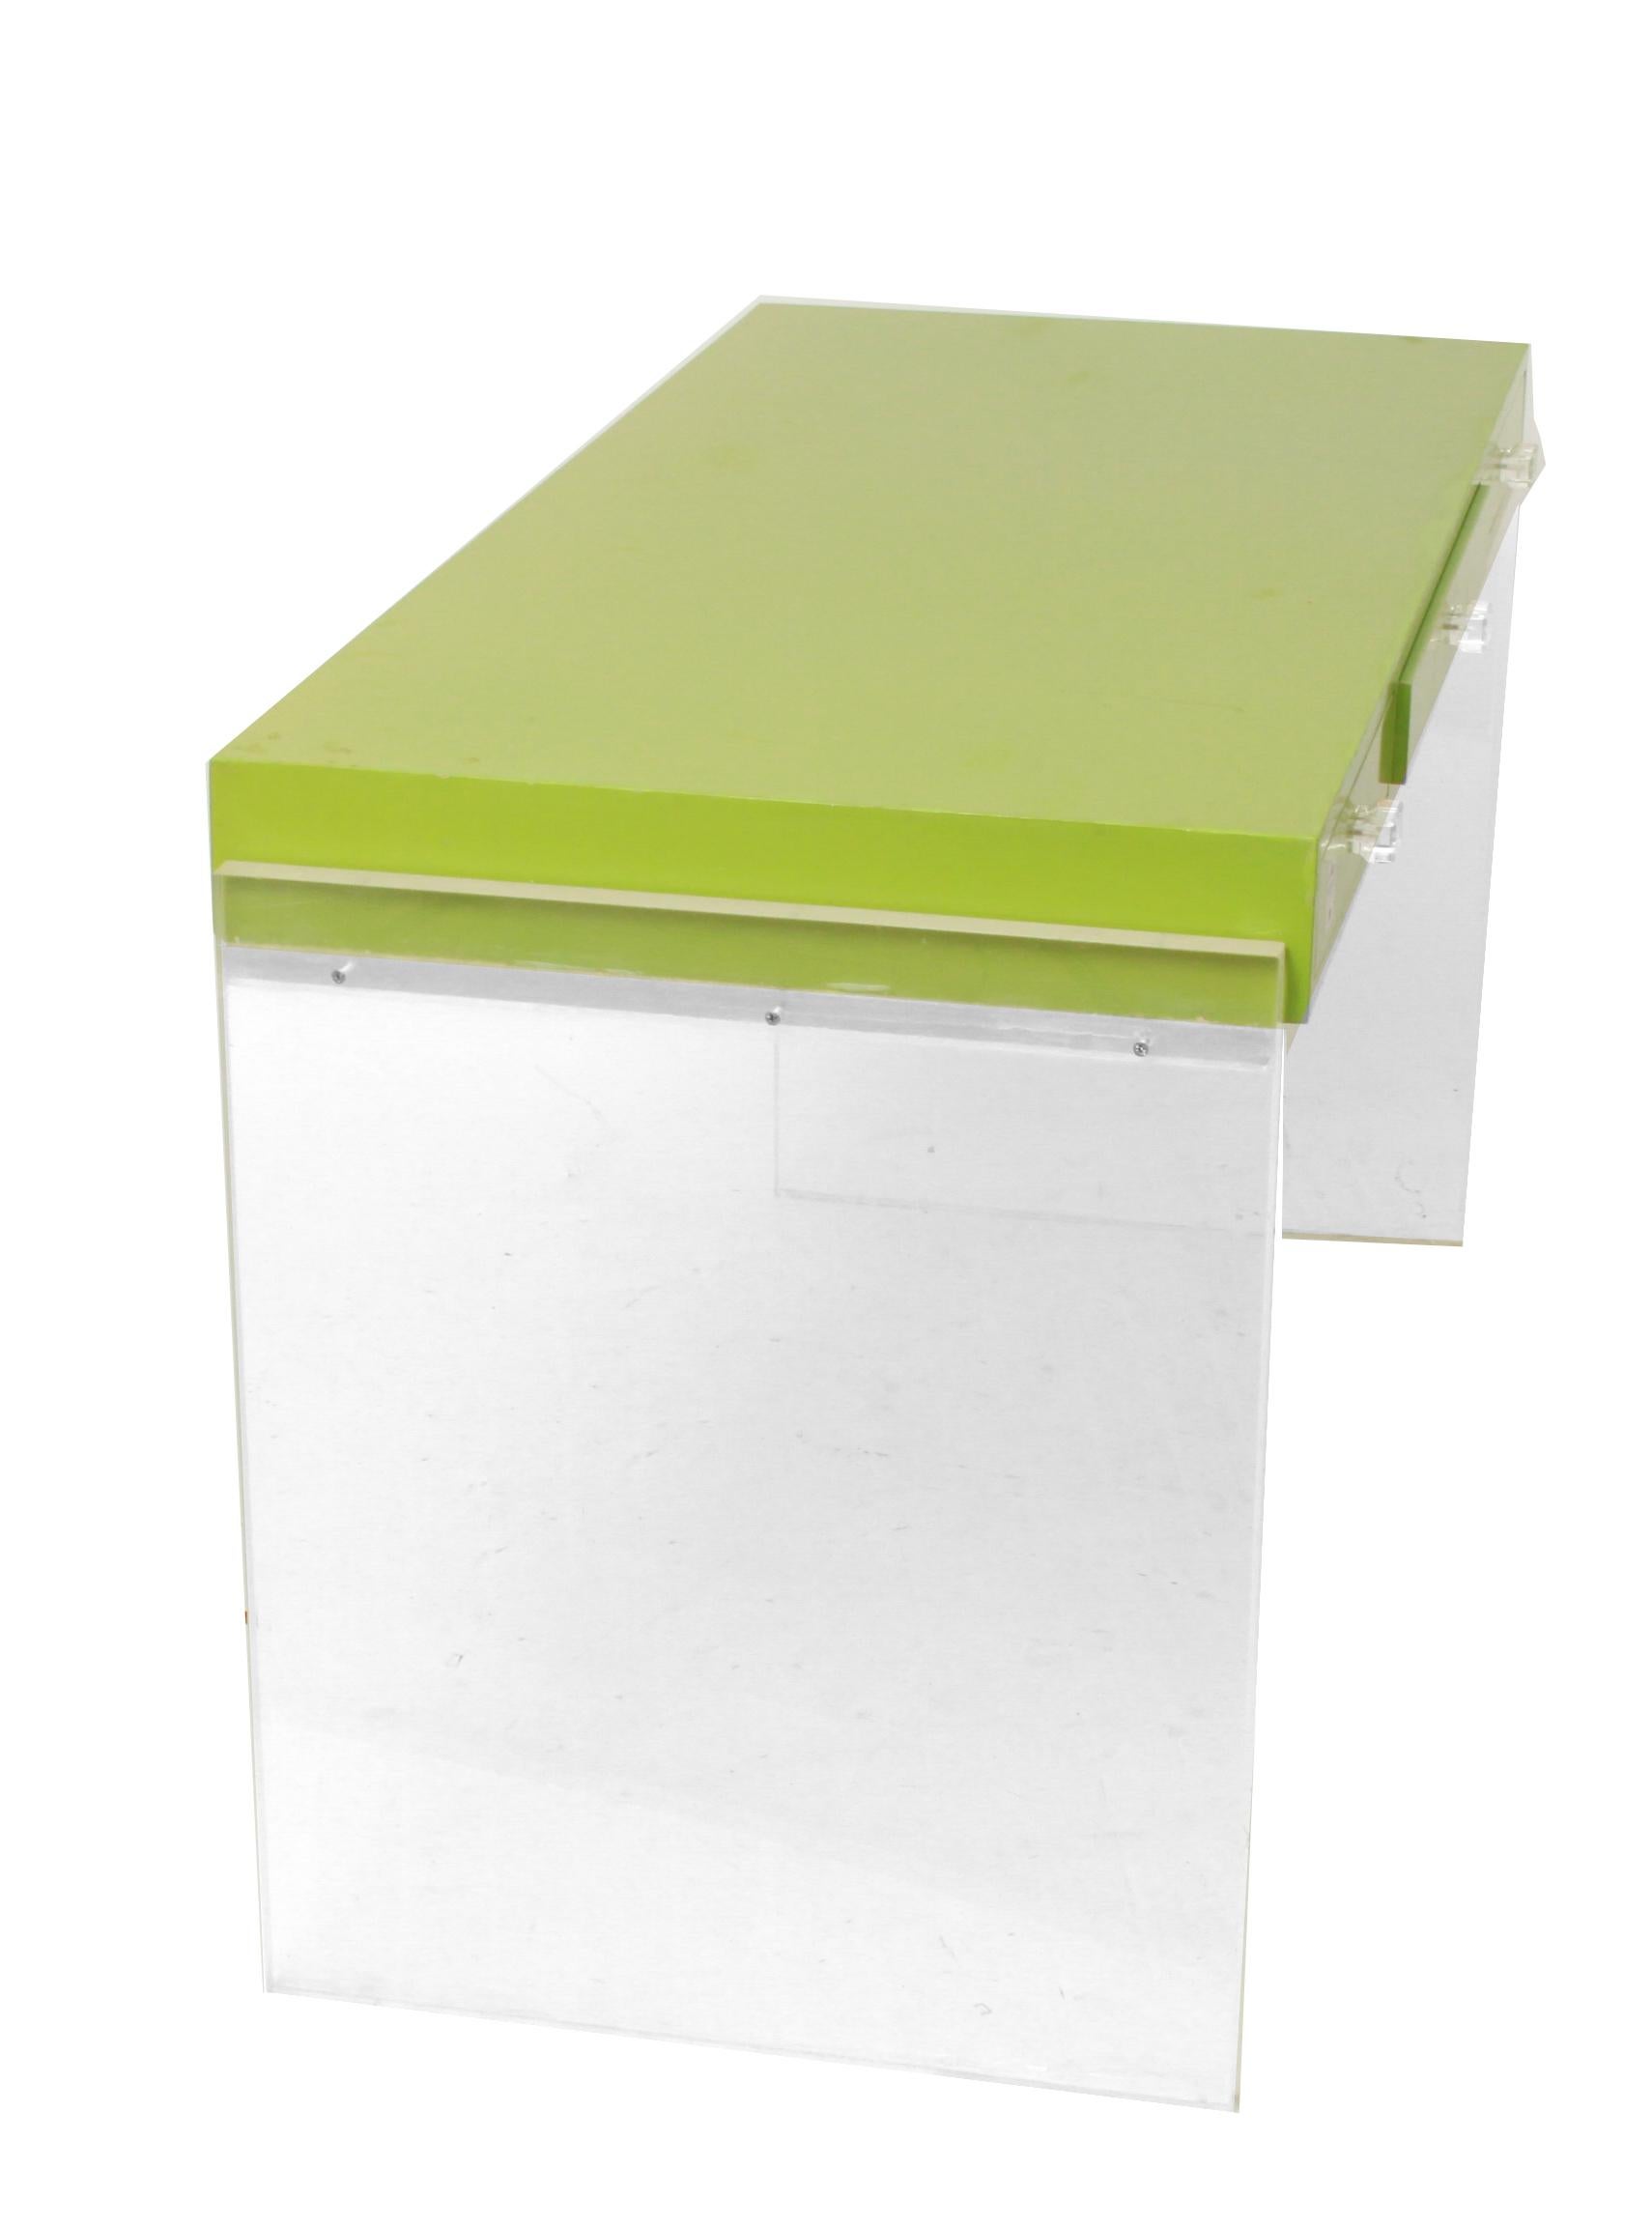 Modern Minimalist desk or writing desk in acrylic and green lacquer. The piece has three low drawers with acrylic pulls. In great vintage condition with age-appropriate wear and use.